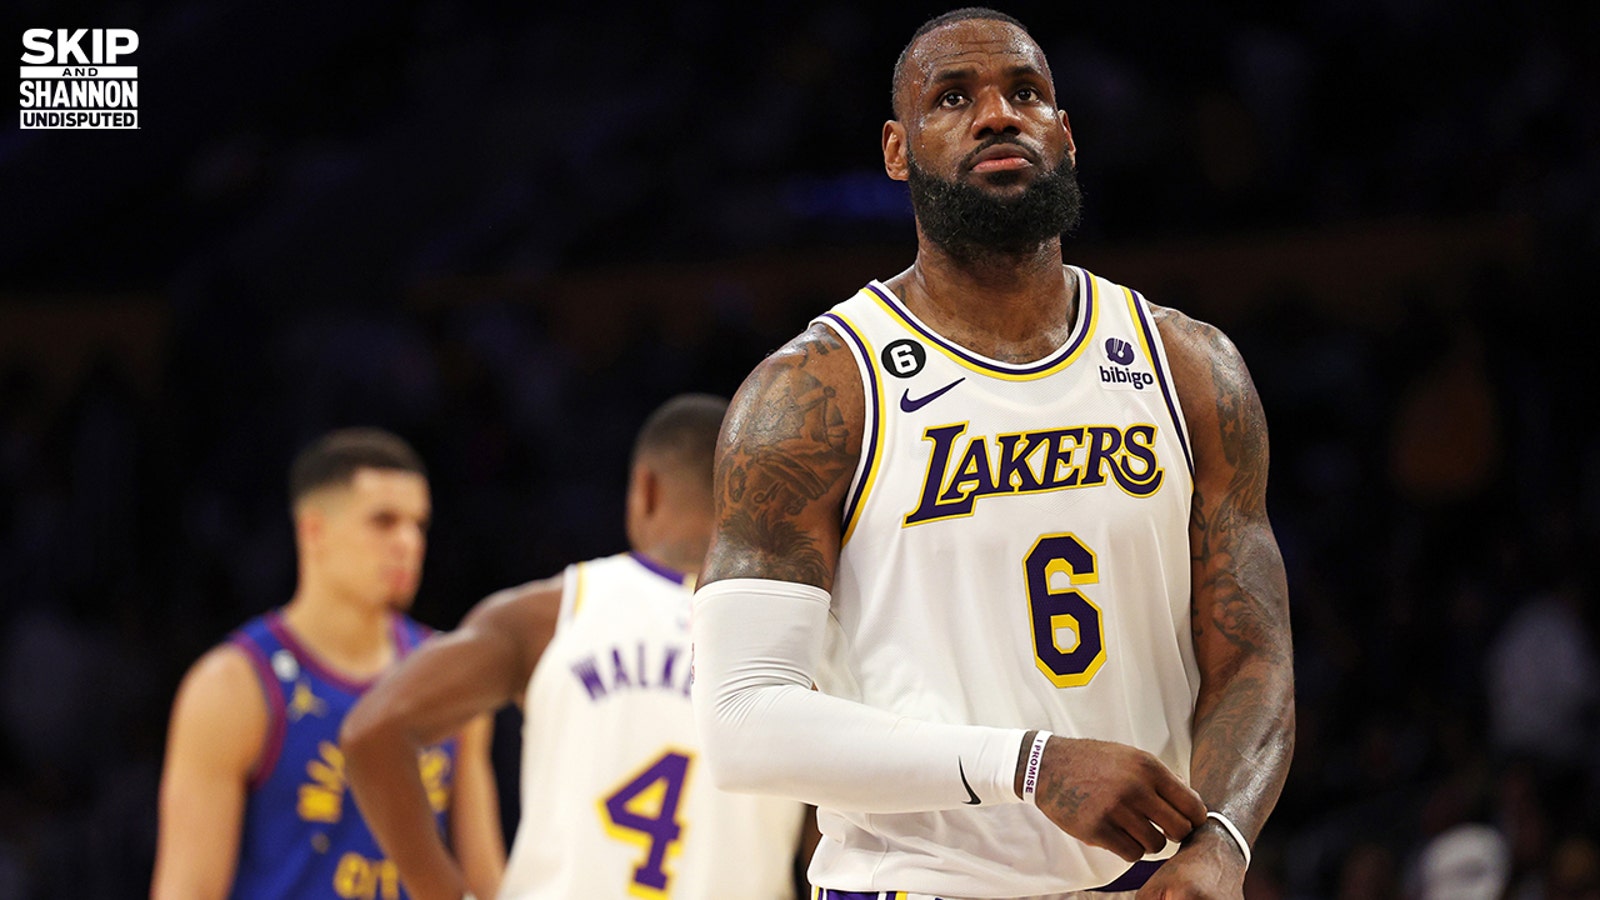 The Lakers are on the brink of elimination in the Western Conference Finals.